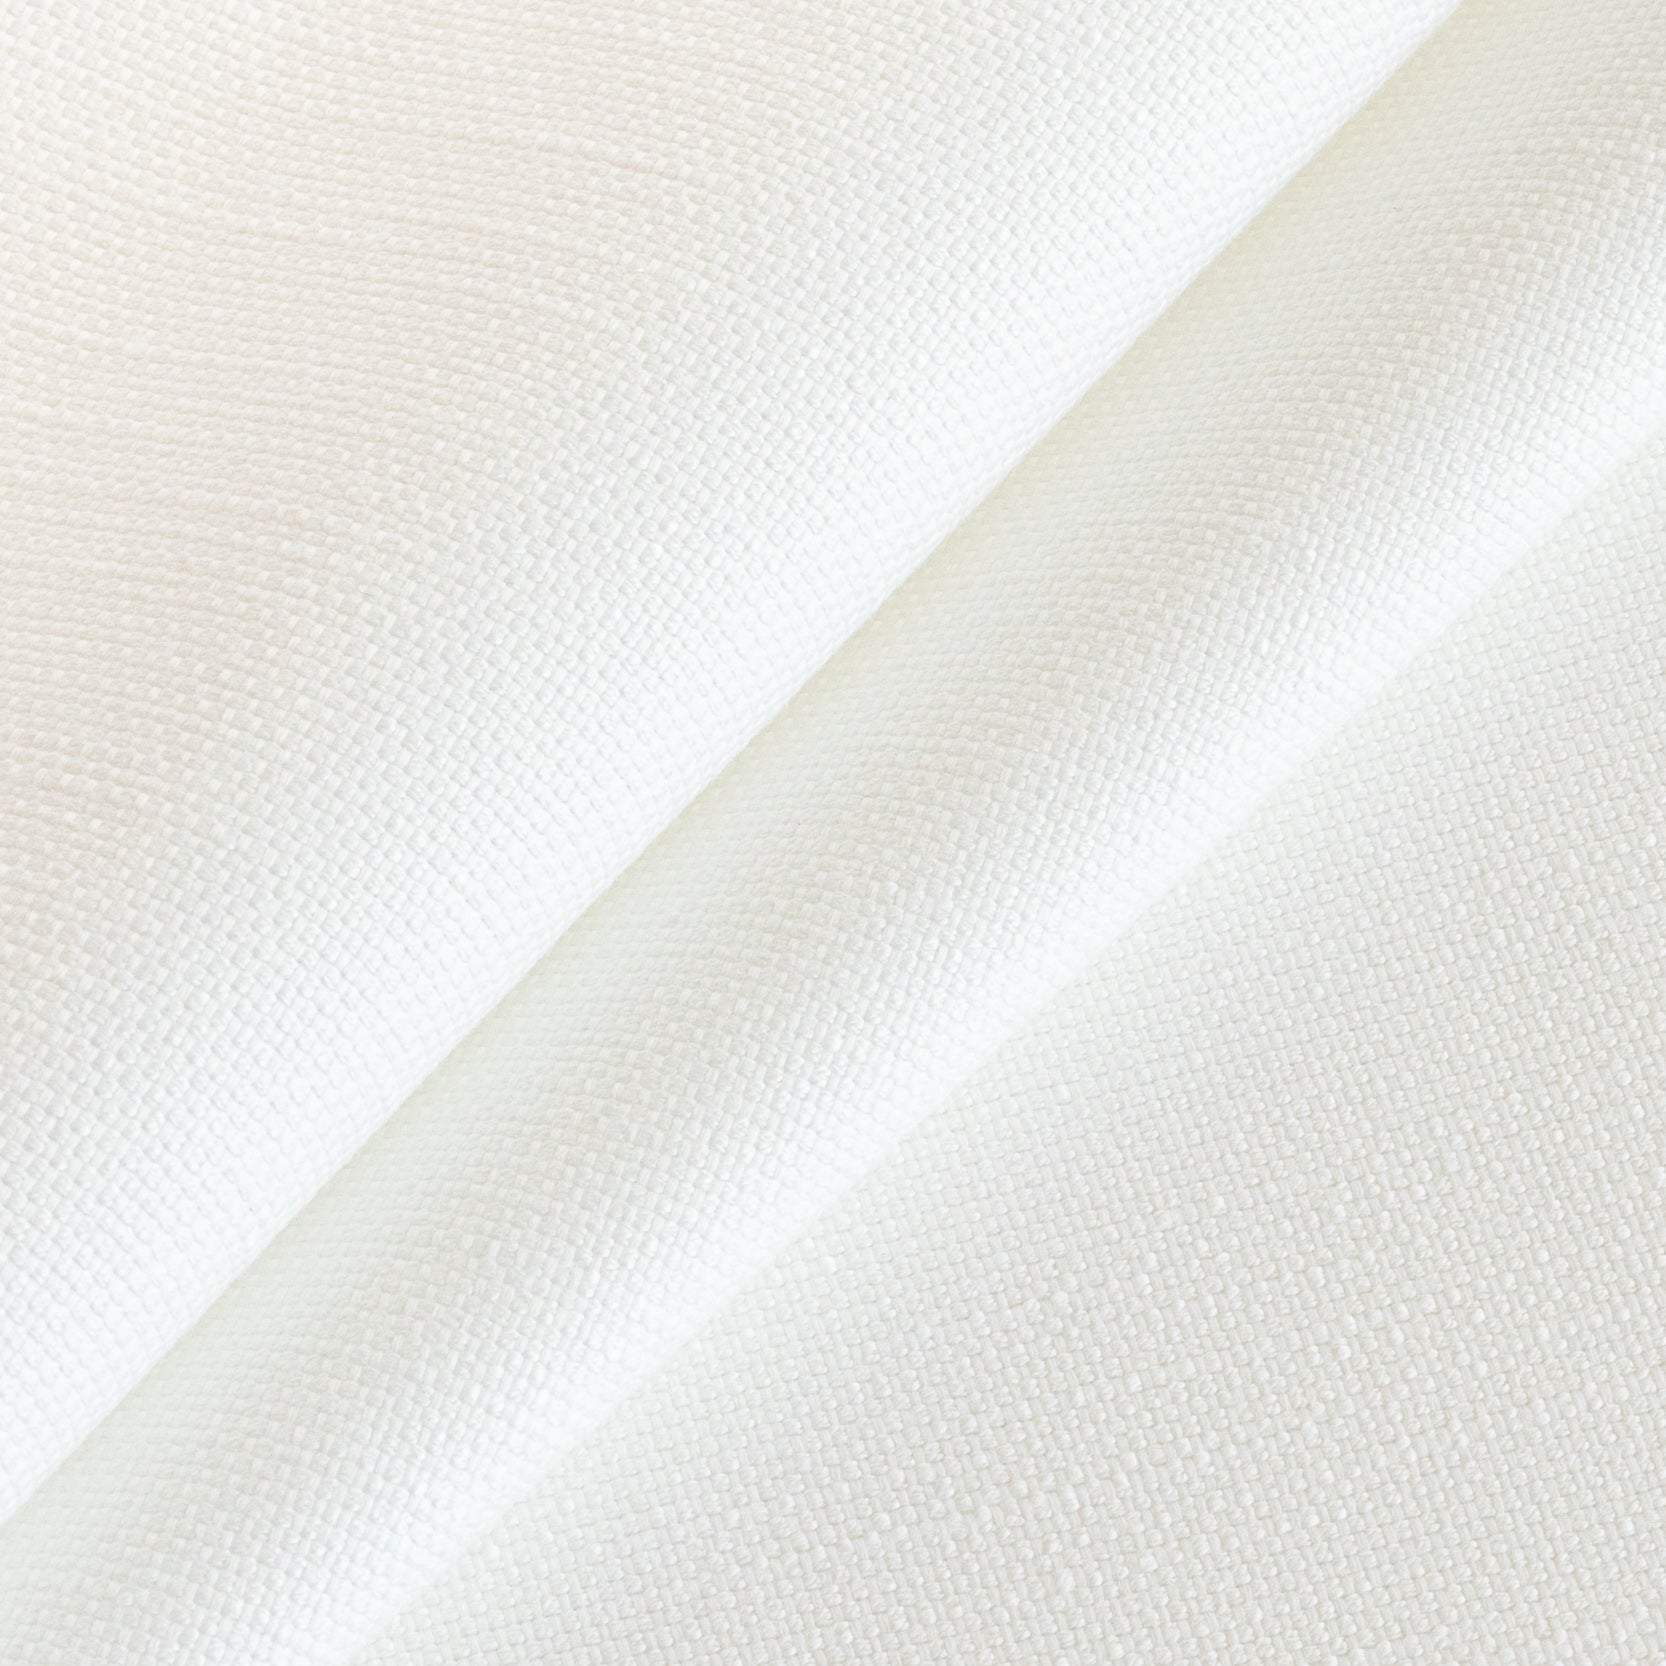 Eden White indoor outdoor fabric from Tonic Living